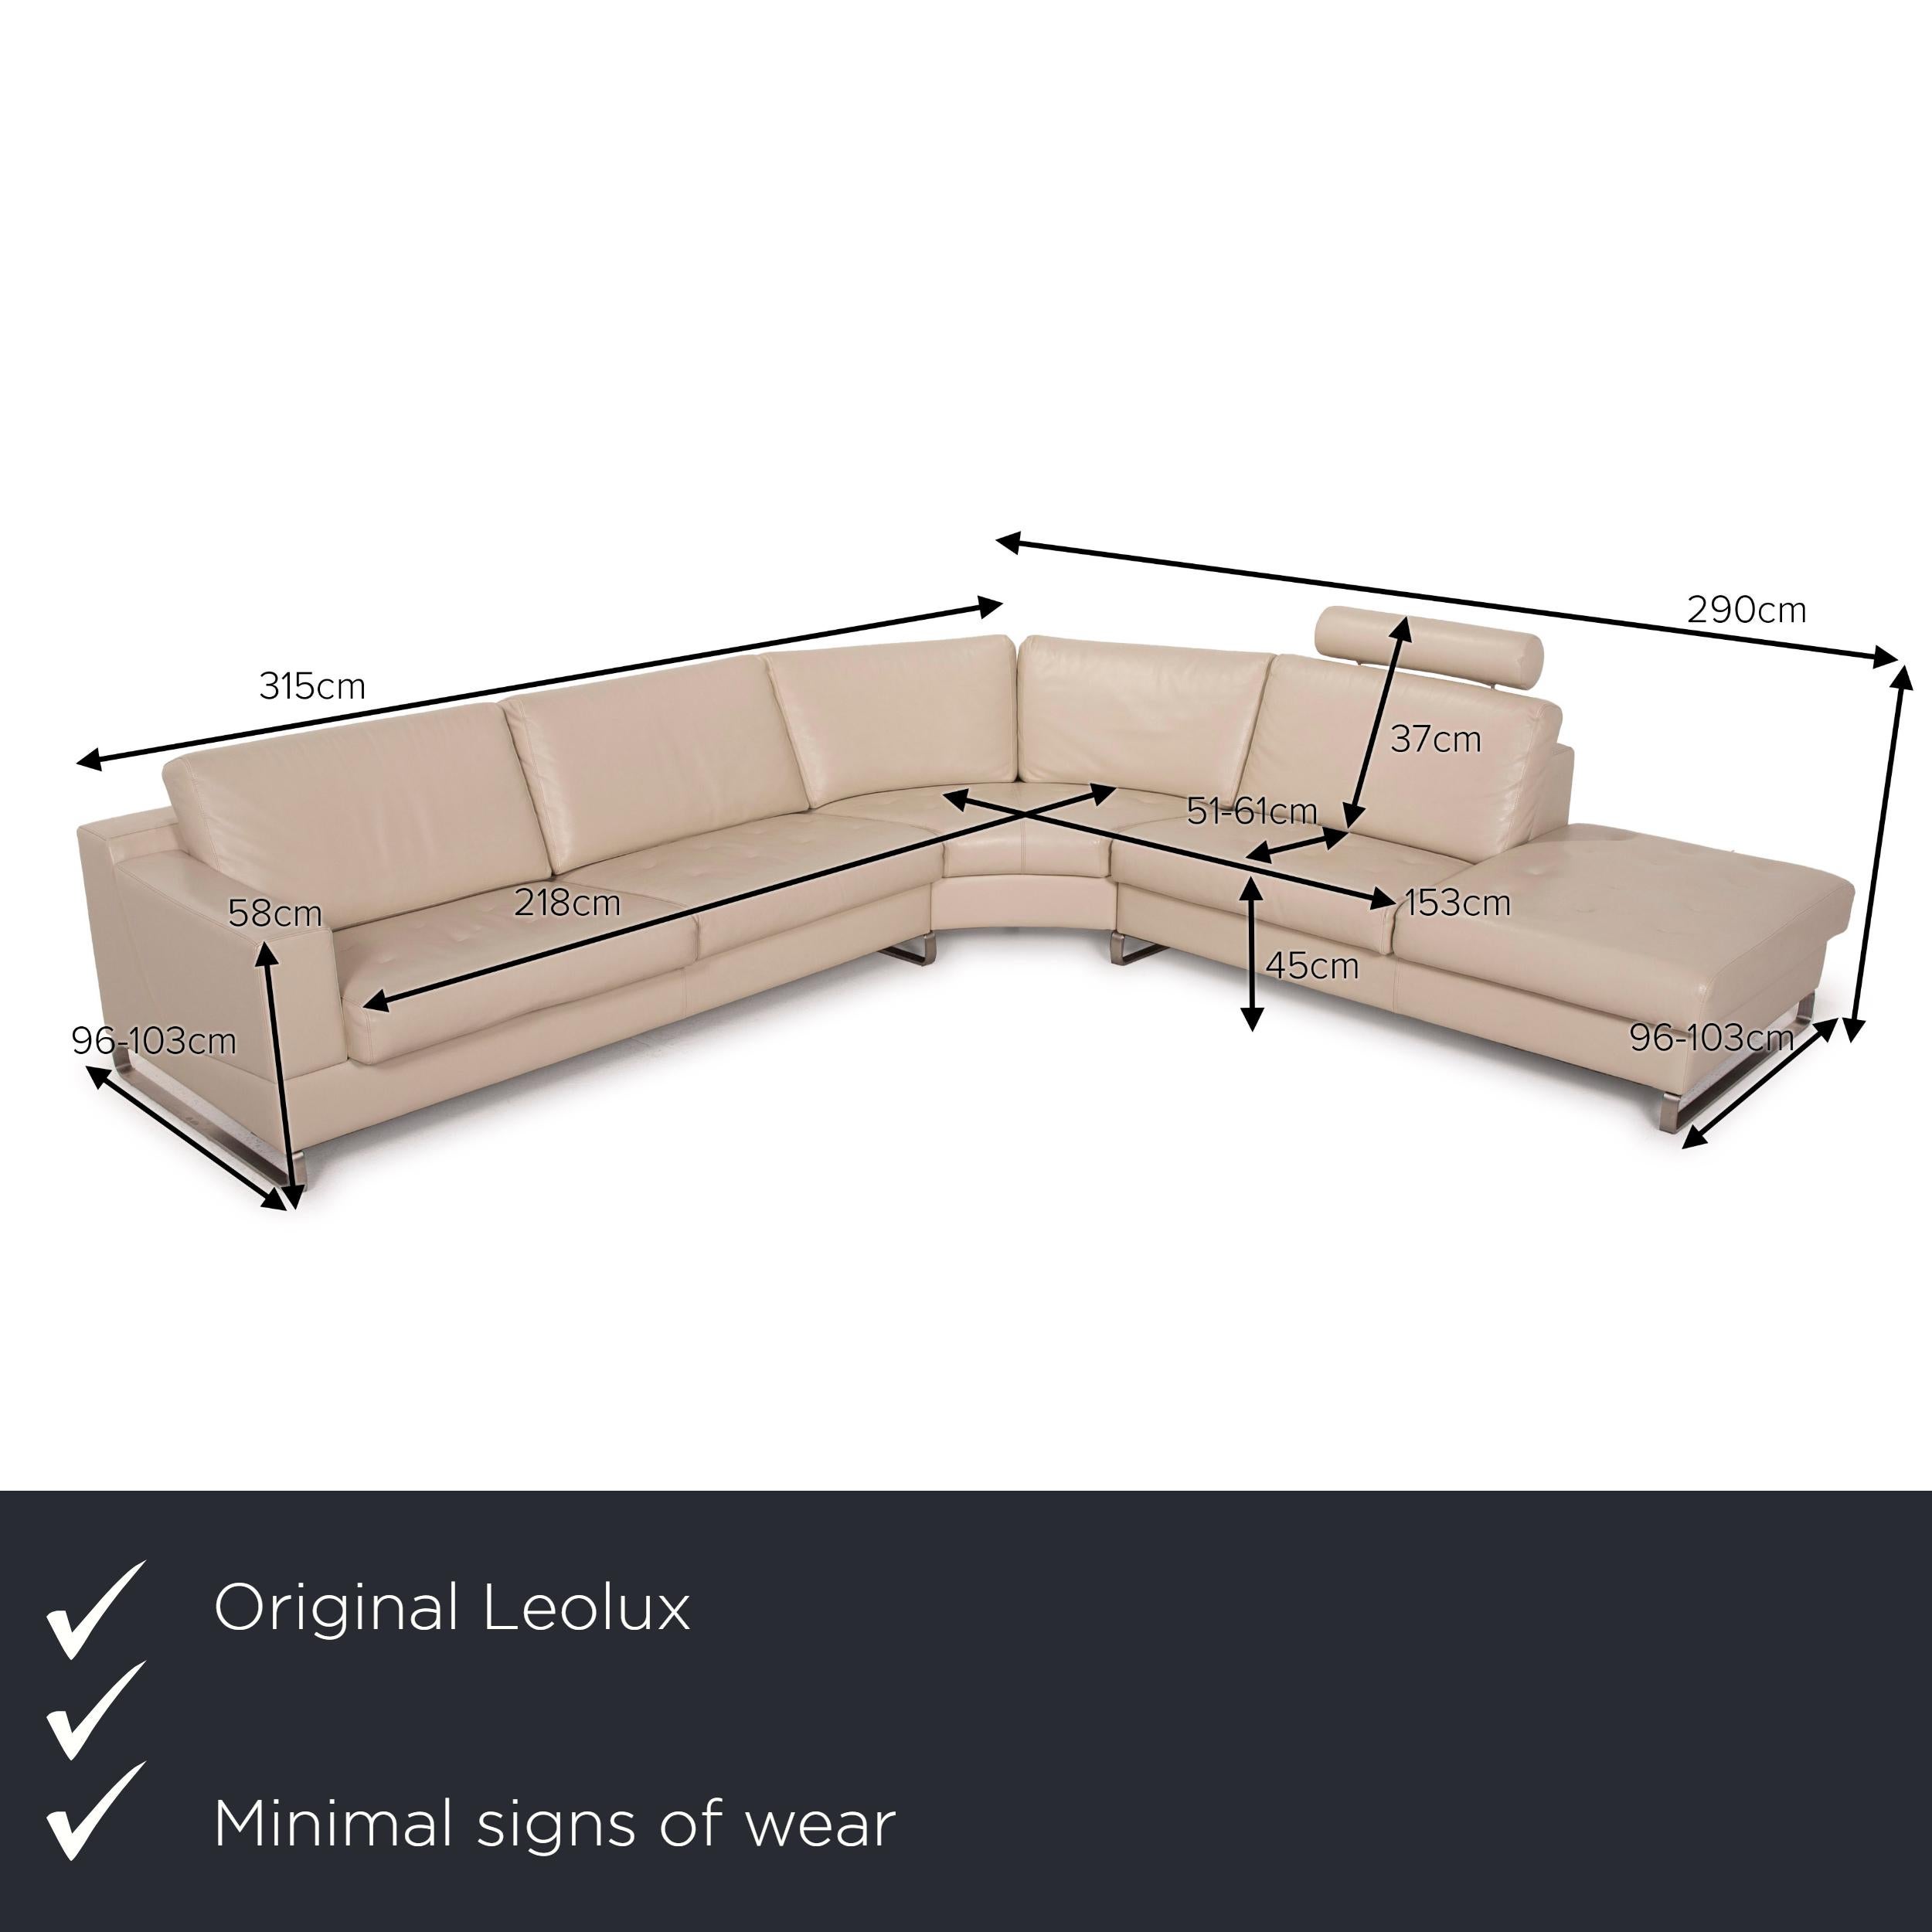 We present to you a Leolux leather sofa cream corner sofa function.


 Product measurements in centimeters:
 

Depth: 96
Width: 315
Height: 77
Seat height: 45
Rest height: 58
Seat depth: 51
Seat width: 218
Back height: 37.
 